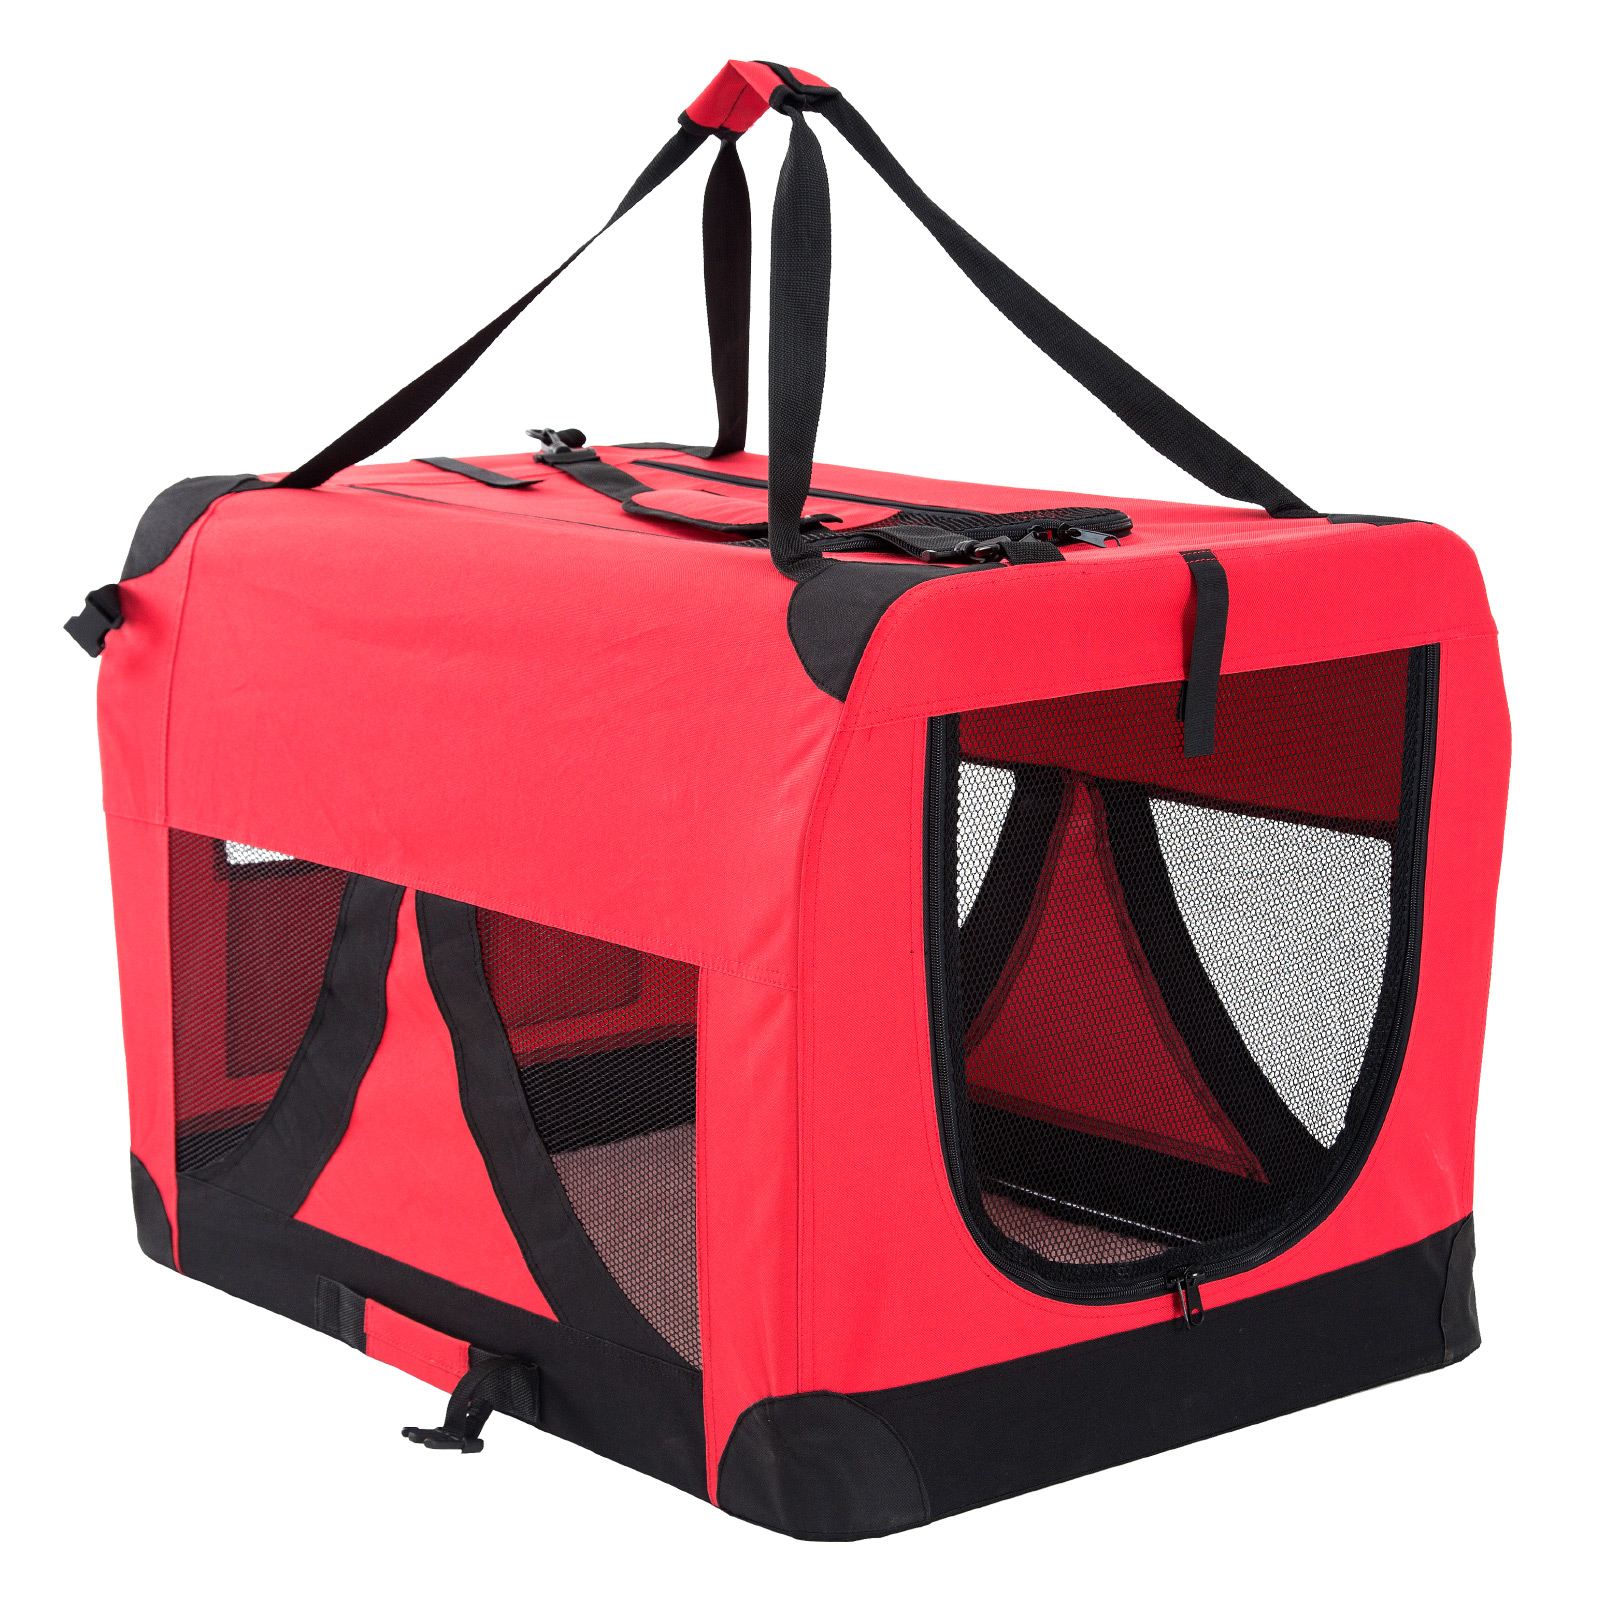 XXXL Portable Soft Dog Crate - RED